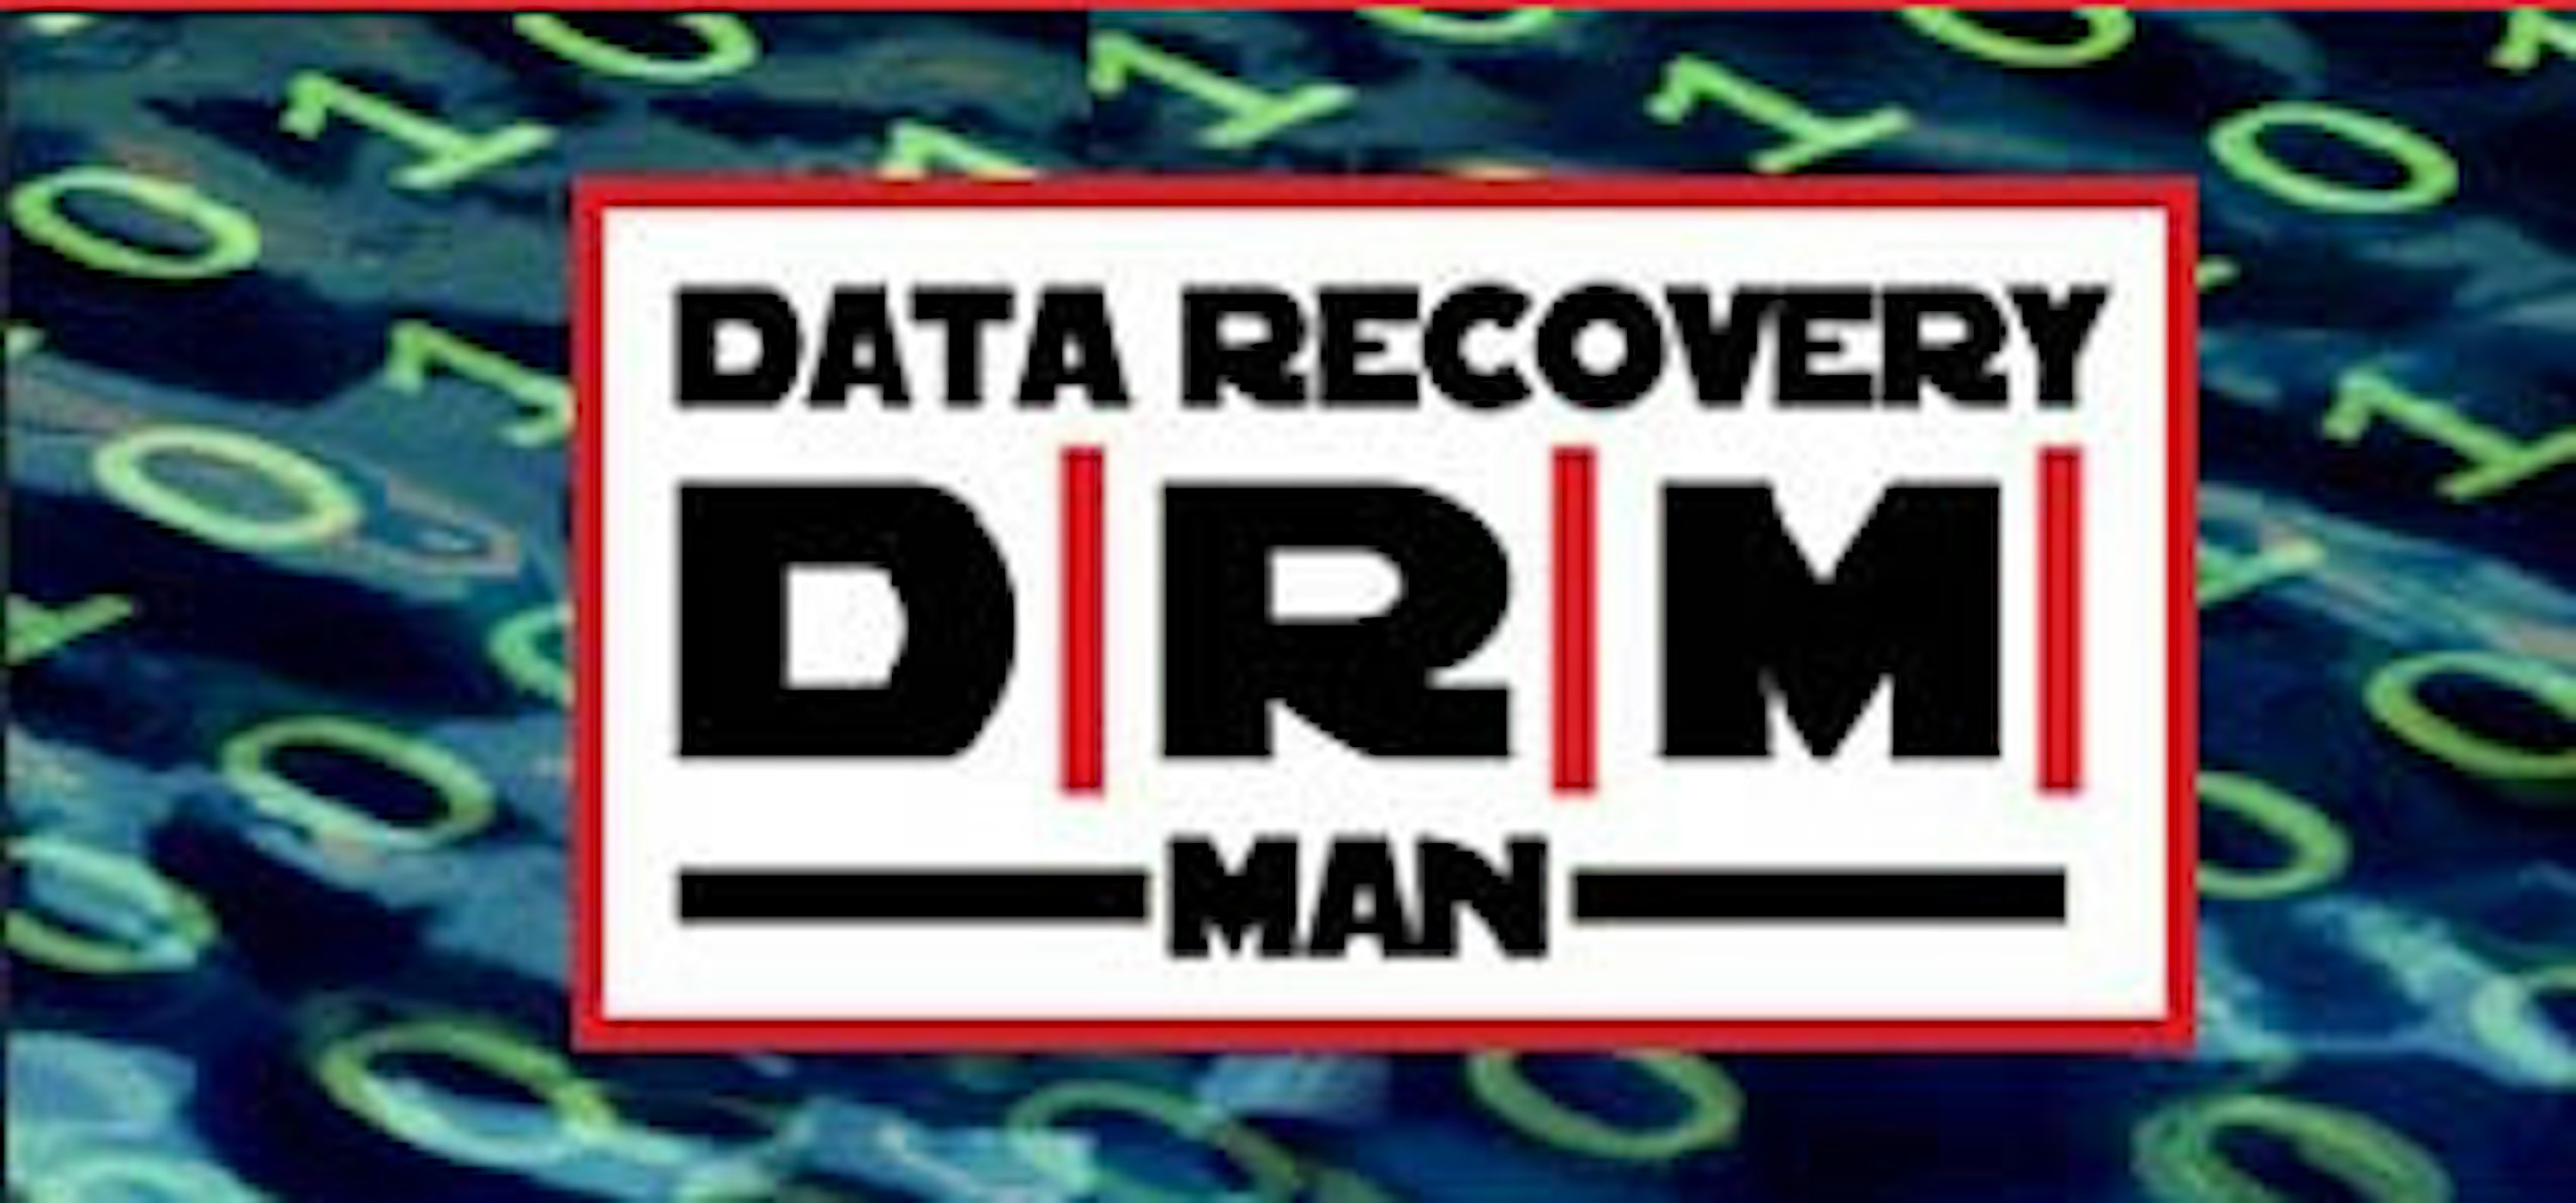 Data Recovery Man